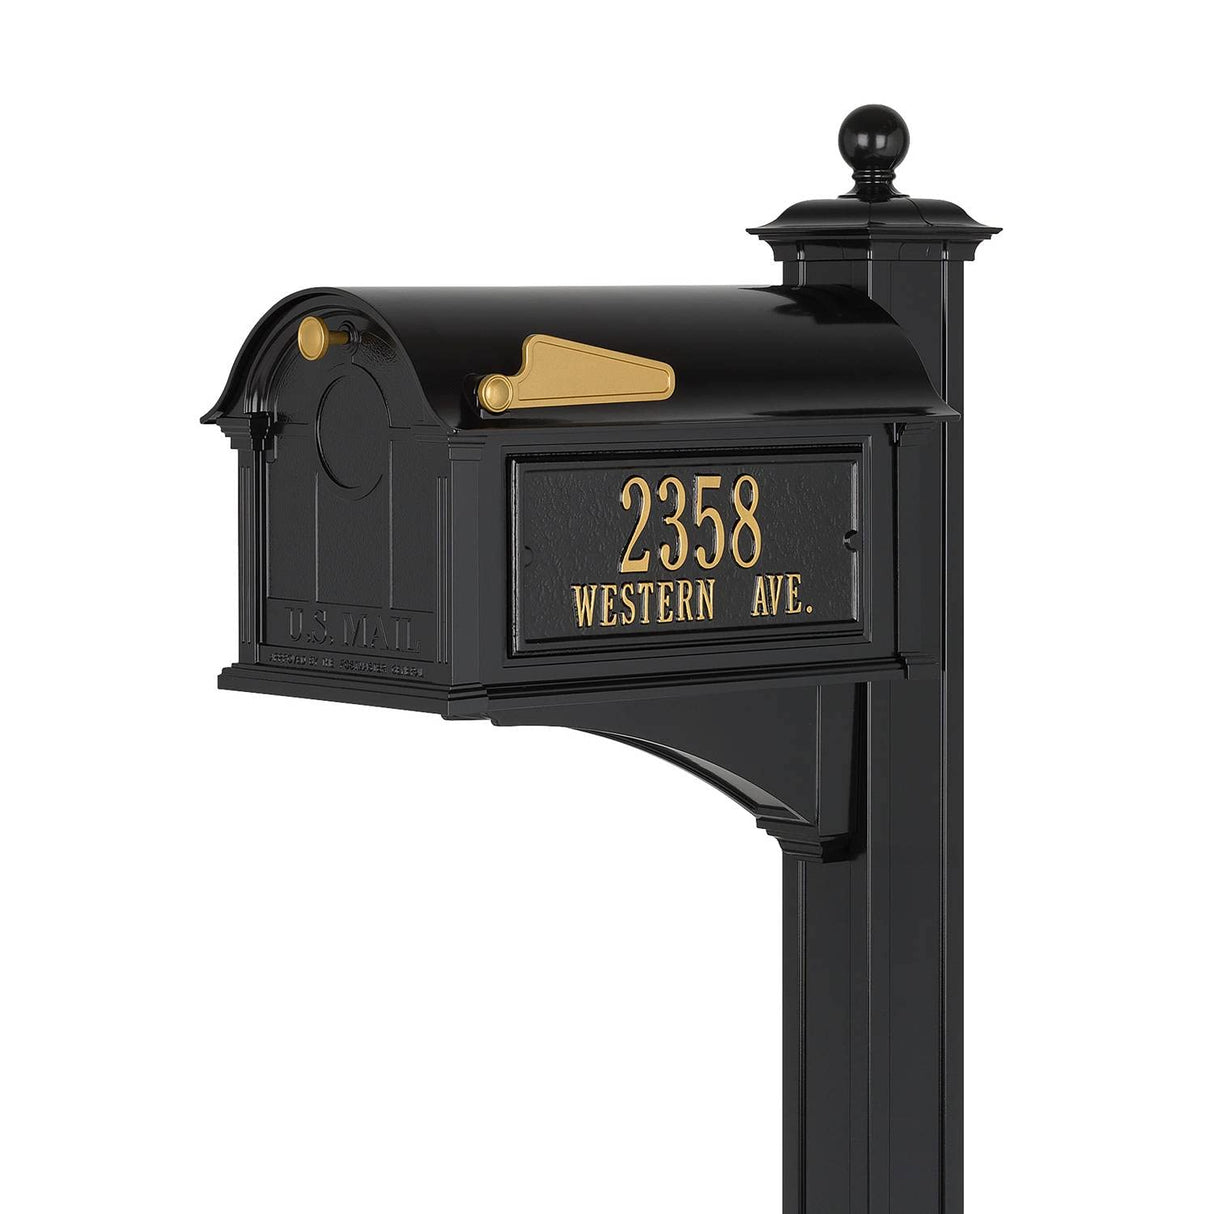 Whitehall 16368 - Balmoral Mailbox Side Plaques, Post Package - Black